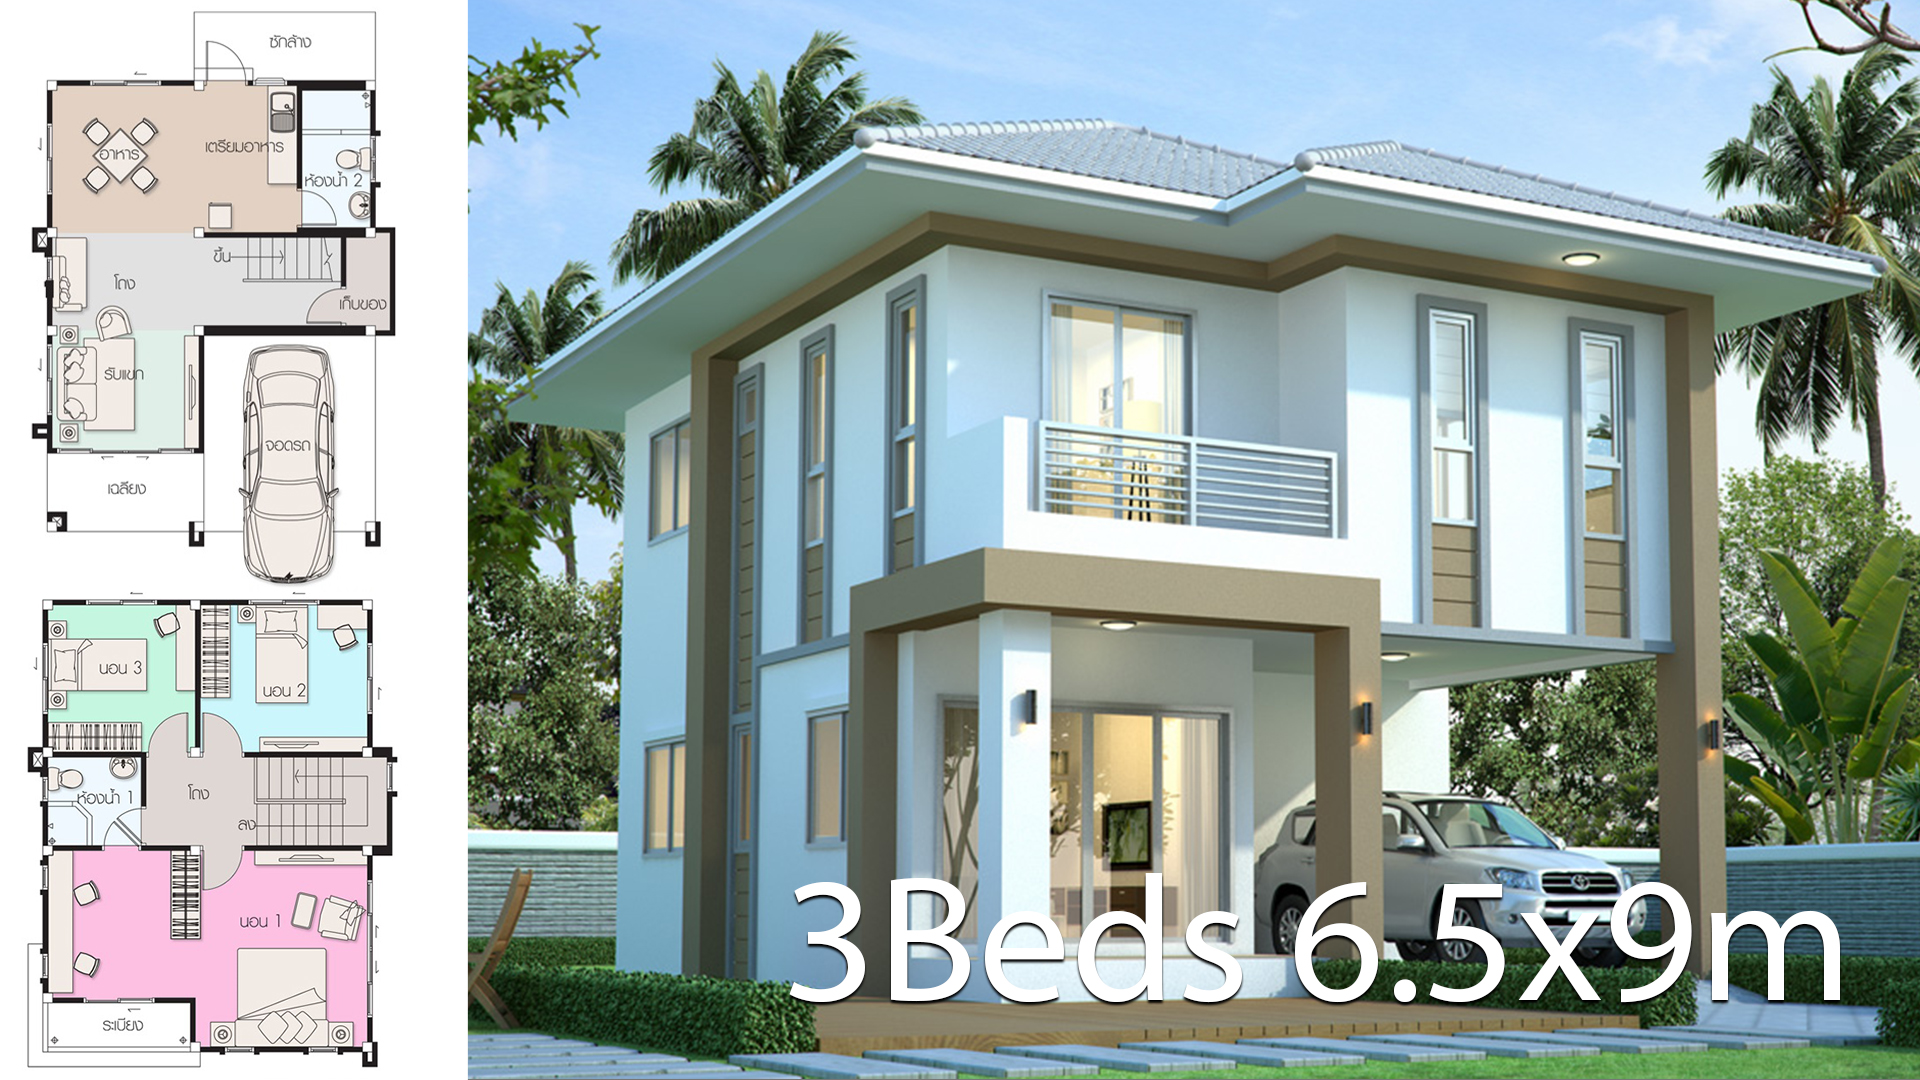 House design plan 6.5x9m with 3 bedrooms